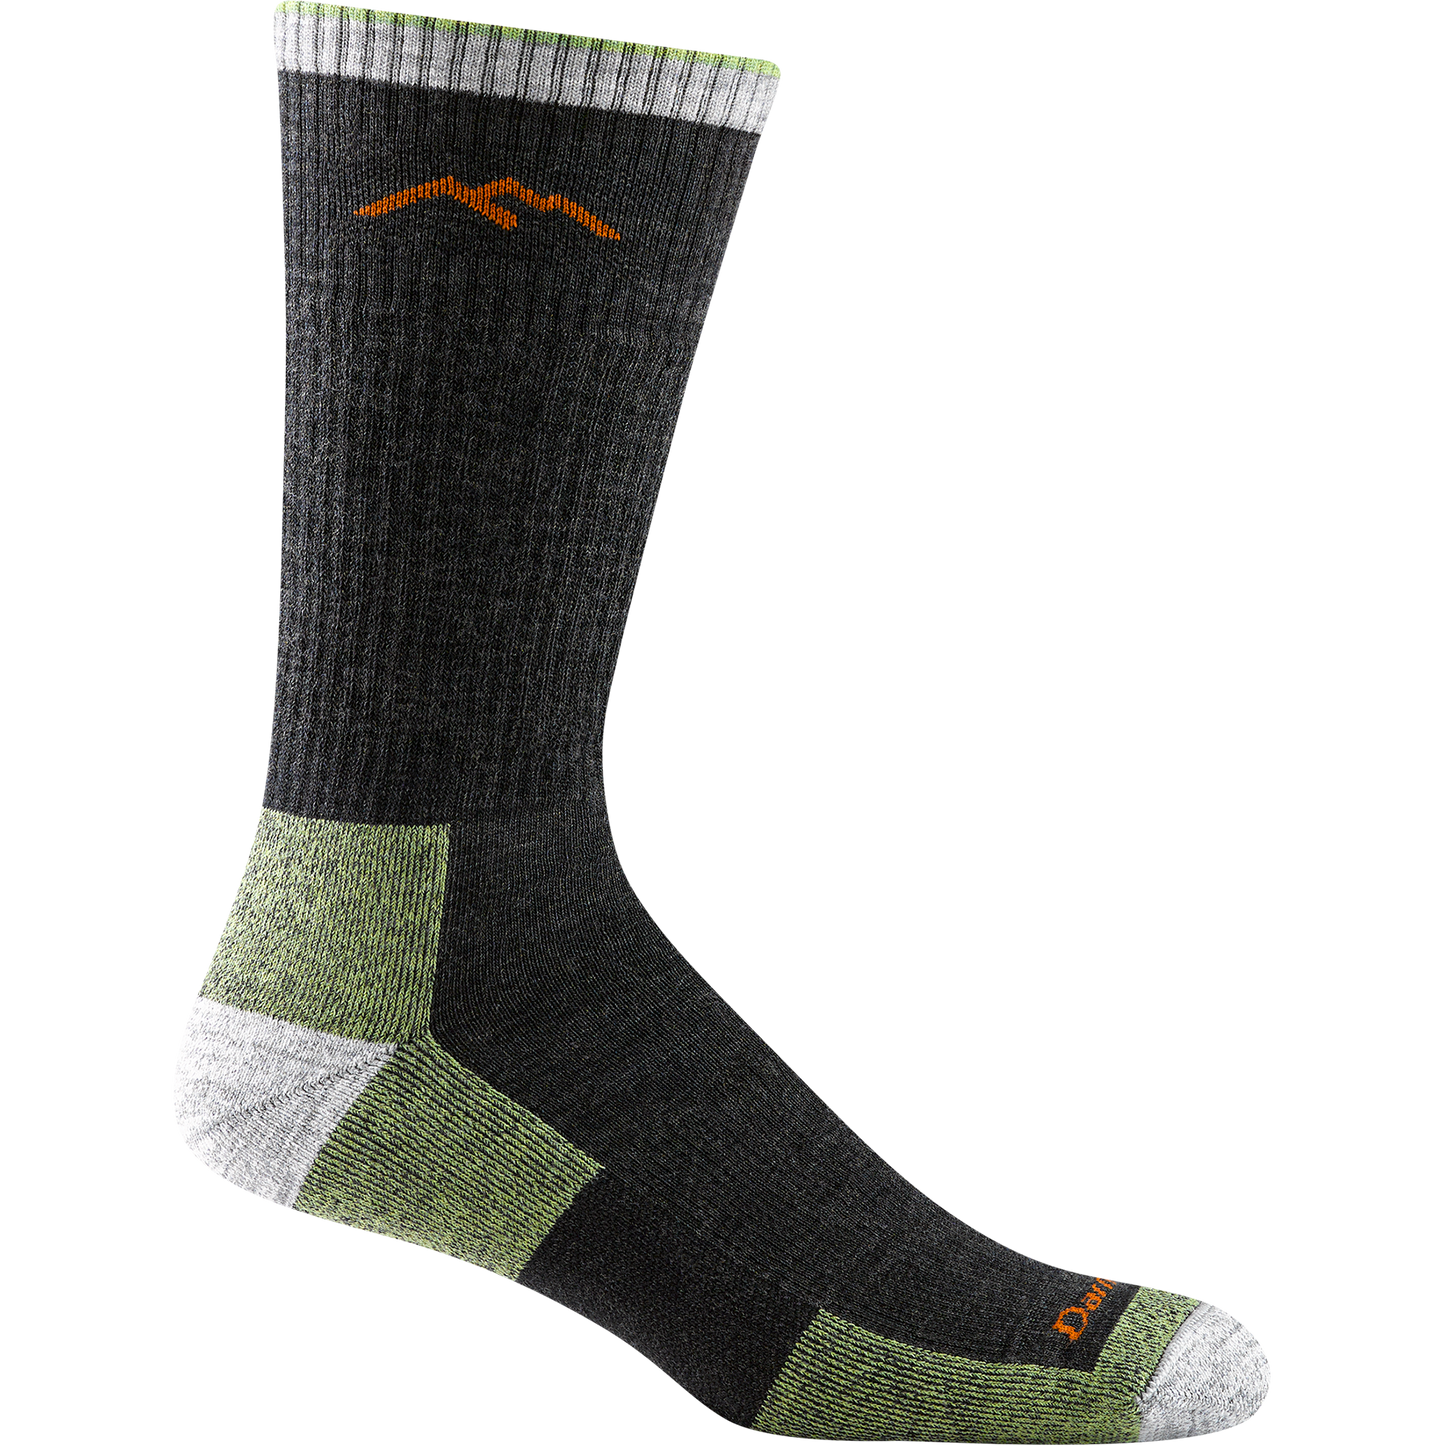 Darn tough lime and charcoal sock with orange mountain outline detail, white toe and heel